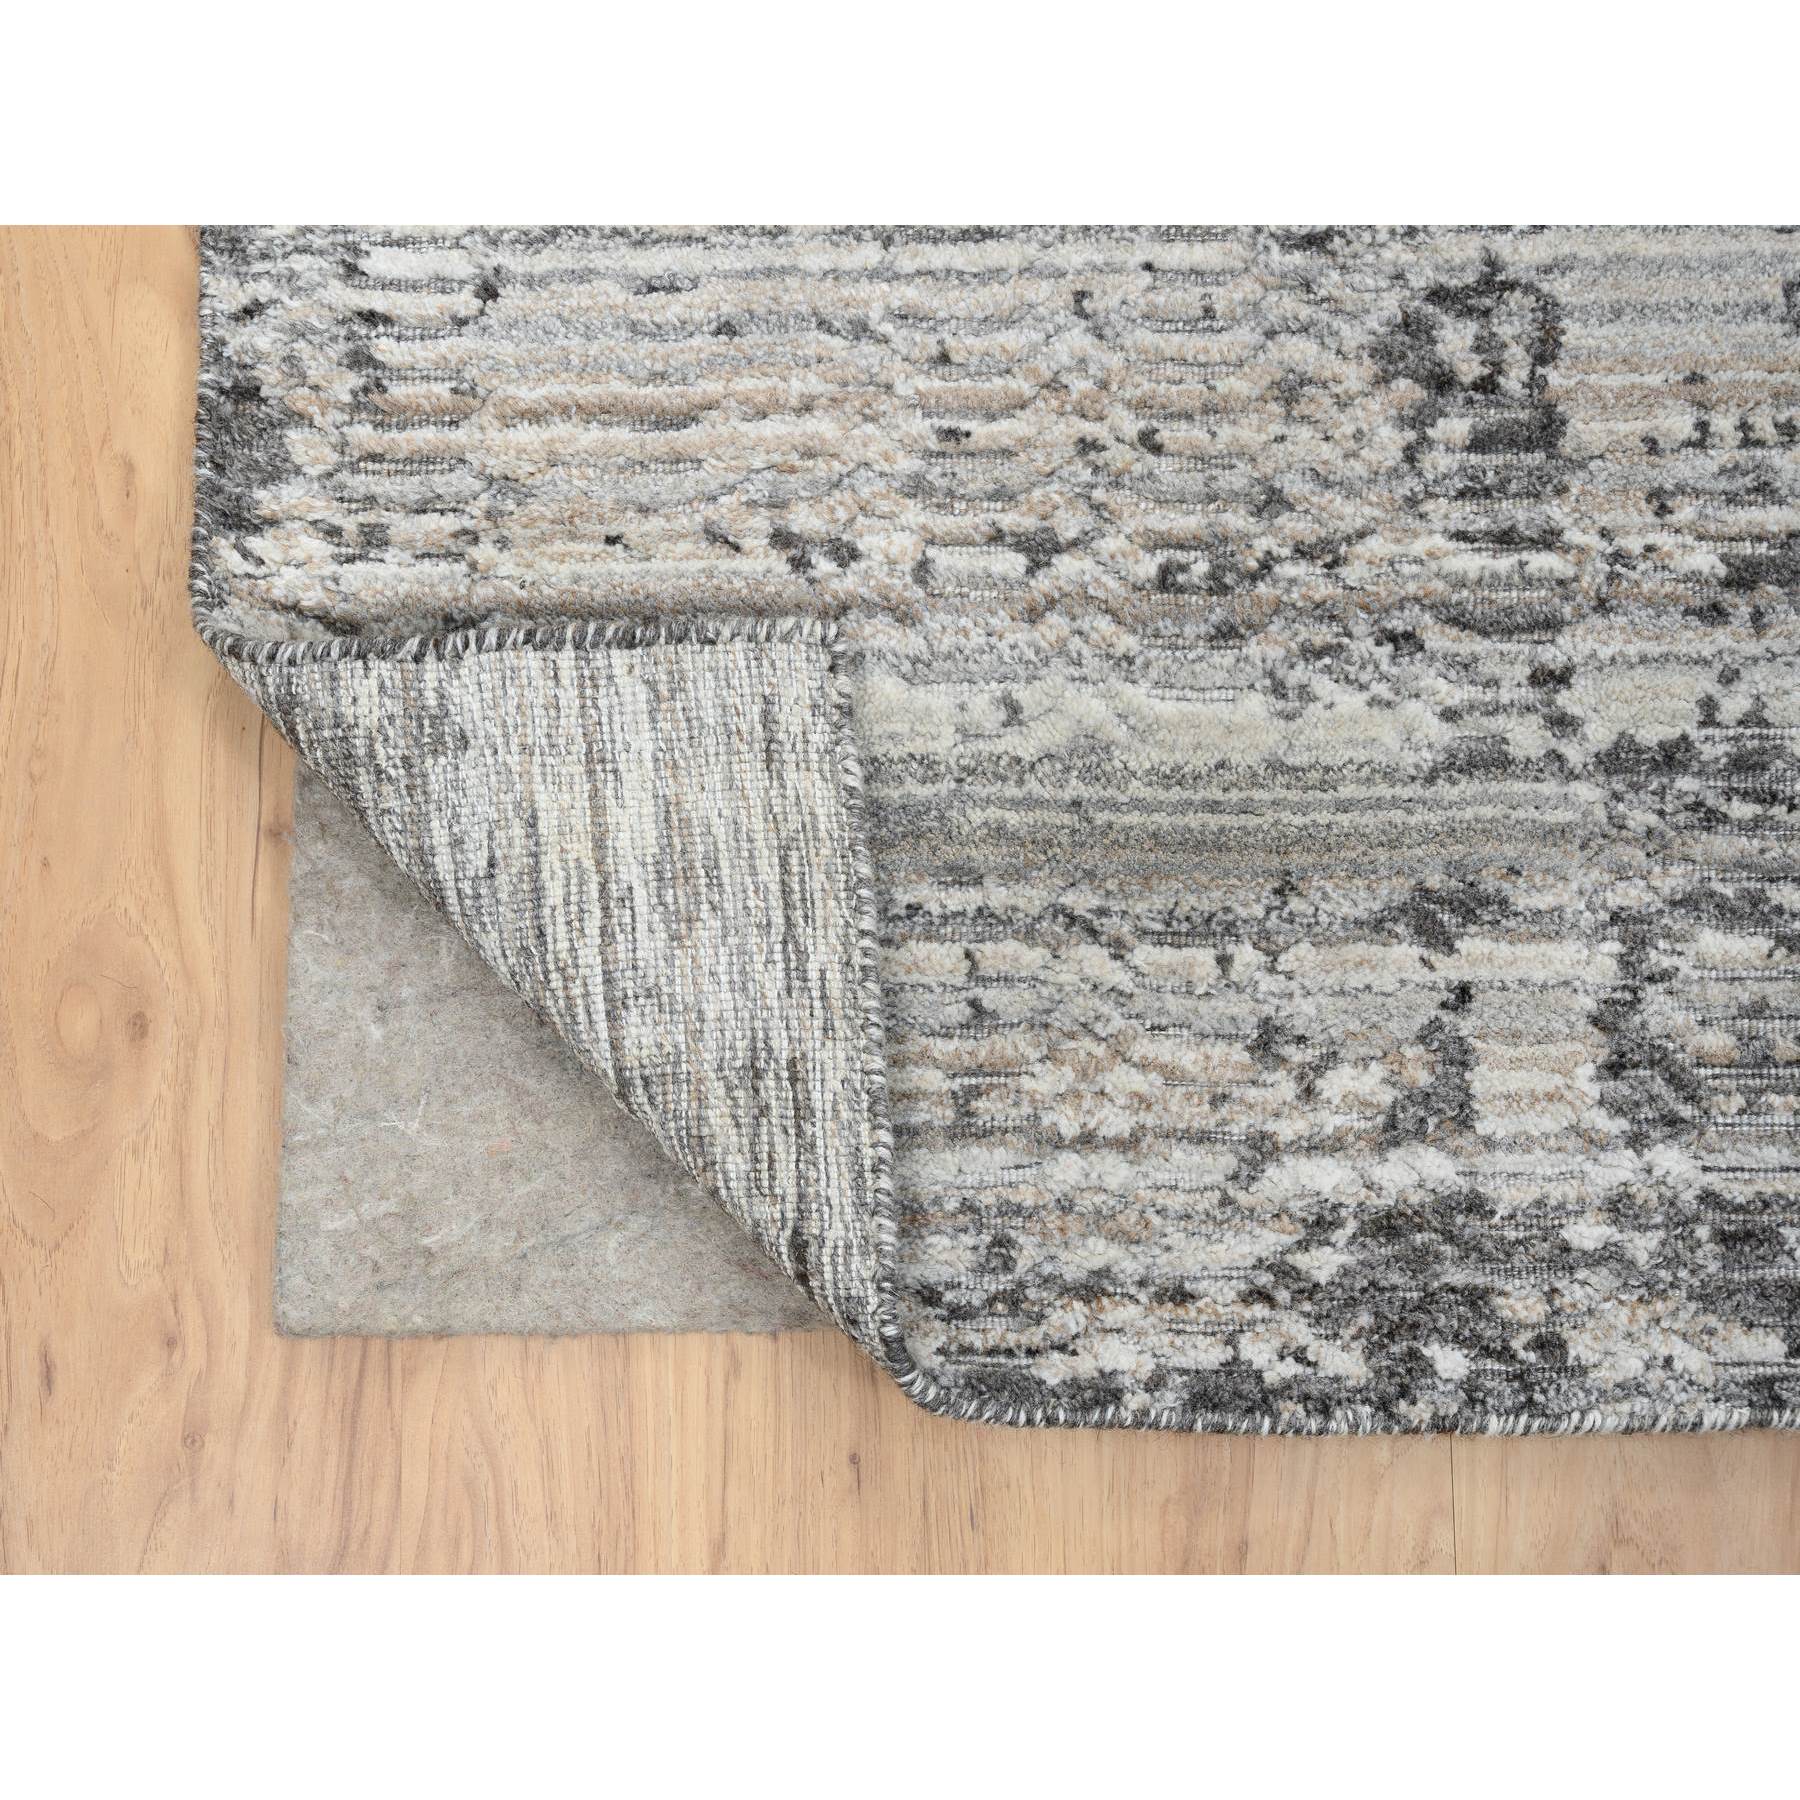 8'2"x10' Gray Natural Wool, Variegated Texture Modern Abstract Design, Hand Loomed Oriental Rug 